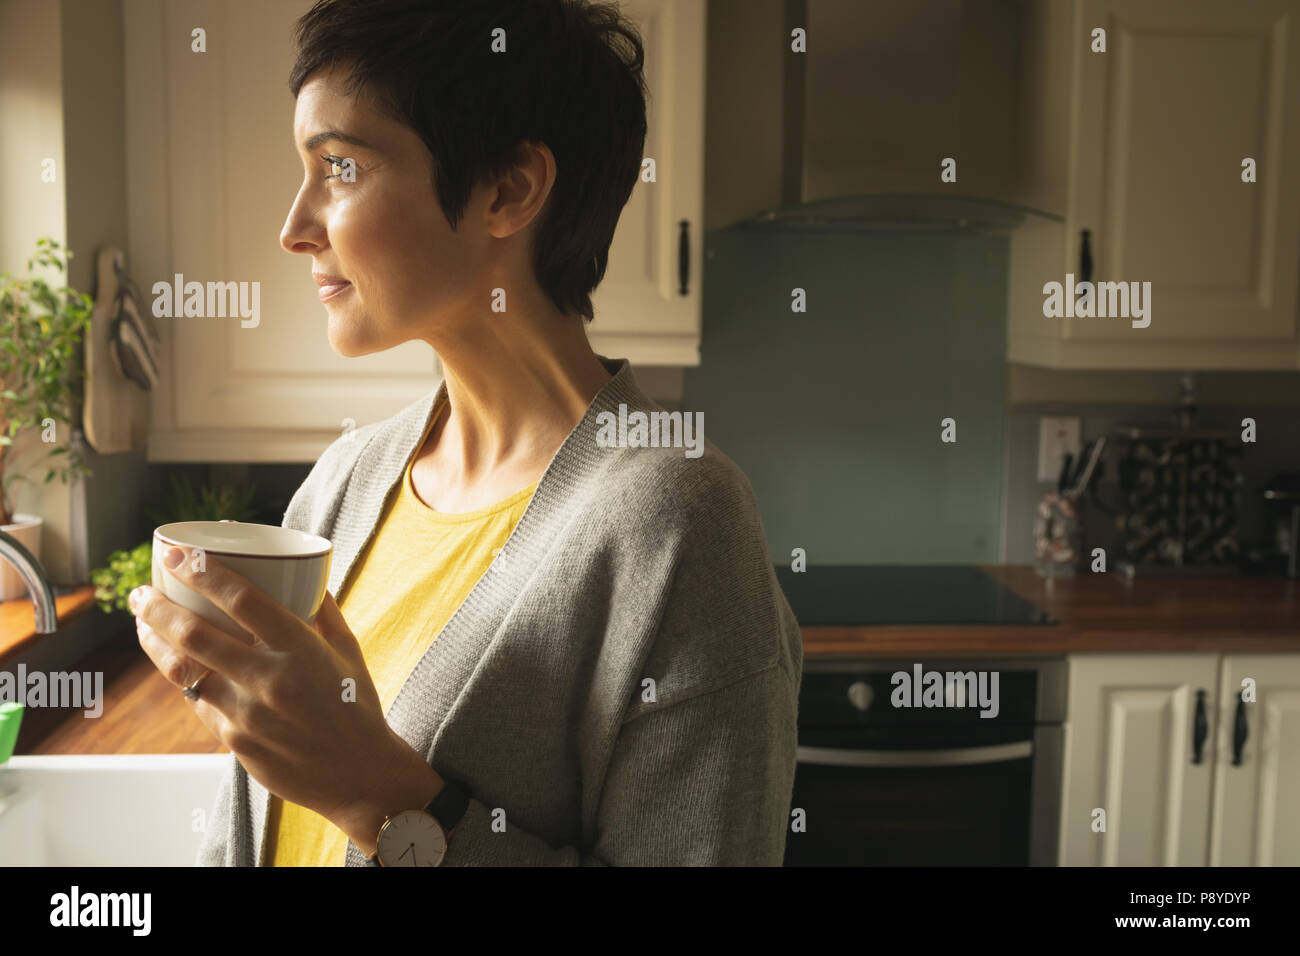 Woman looking away while having coffee in the kitchen Stock Photo